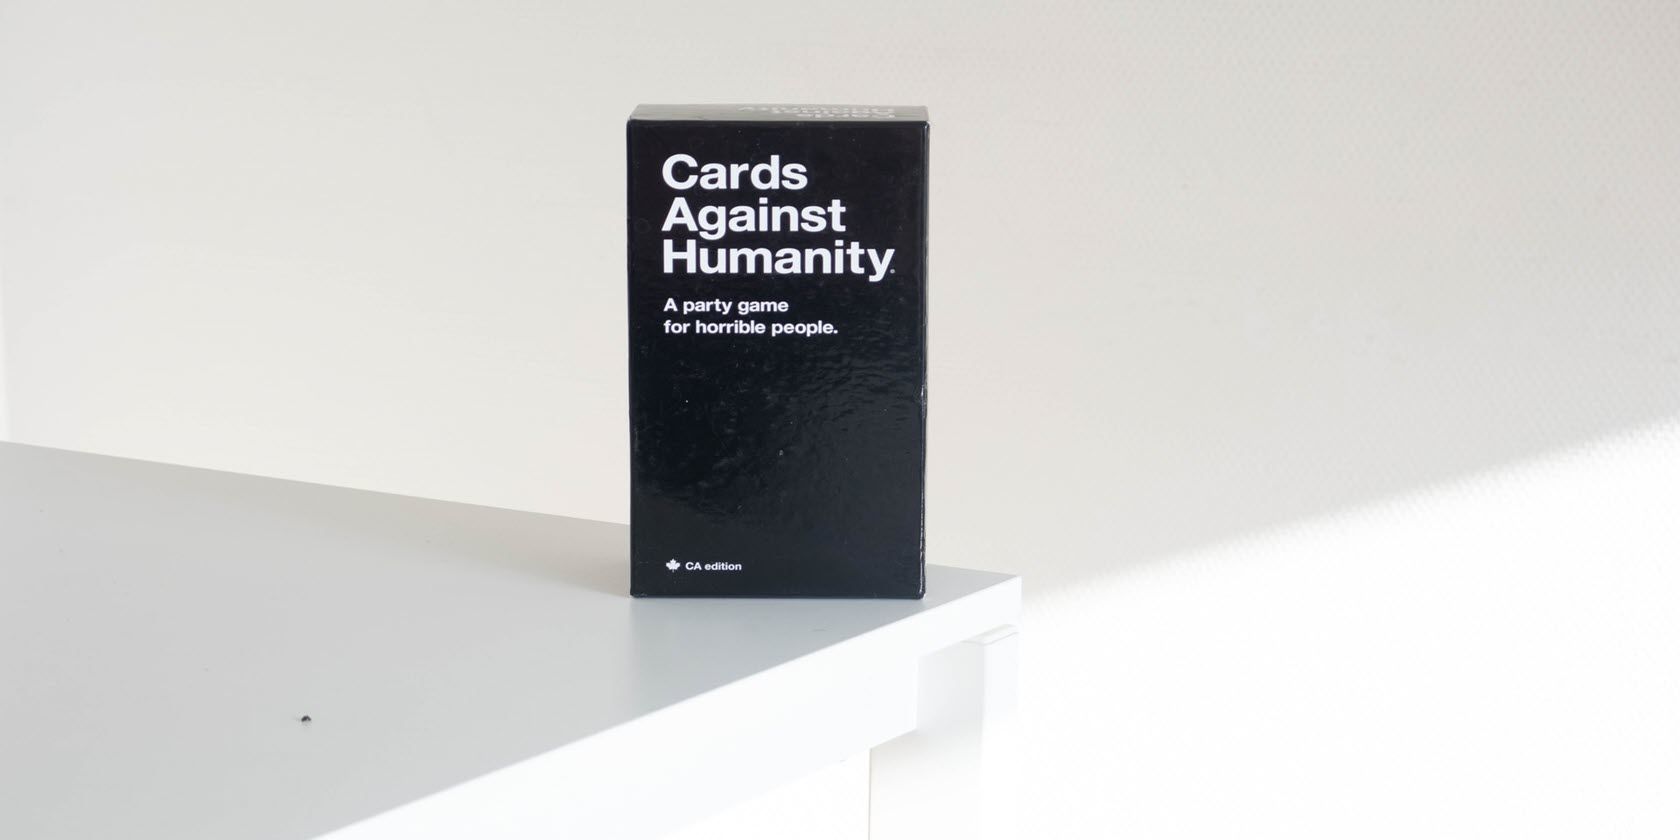 3 Sites to Play Cards Against Humanity Clones Online With Your Friends